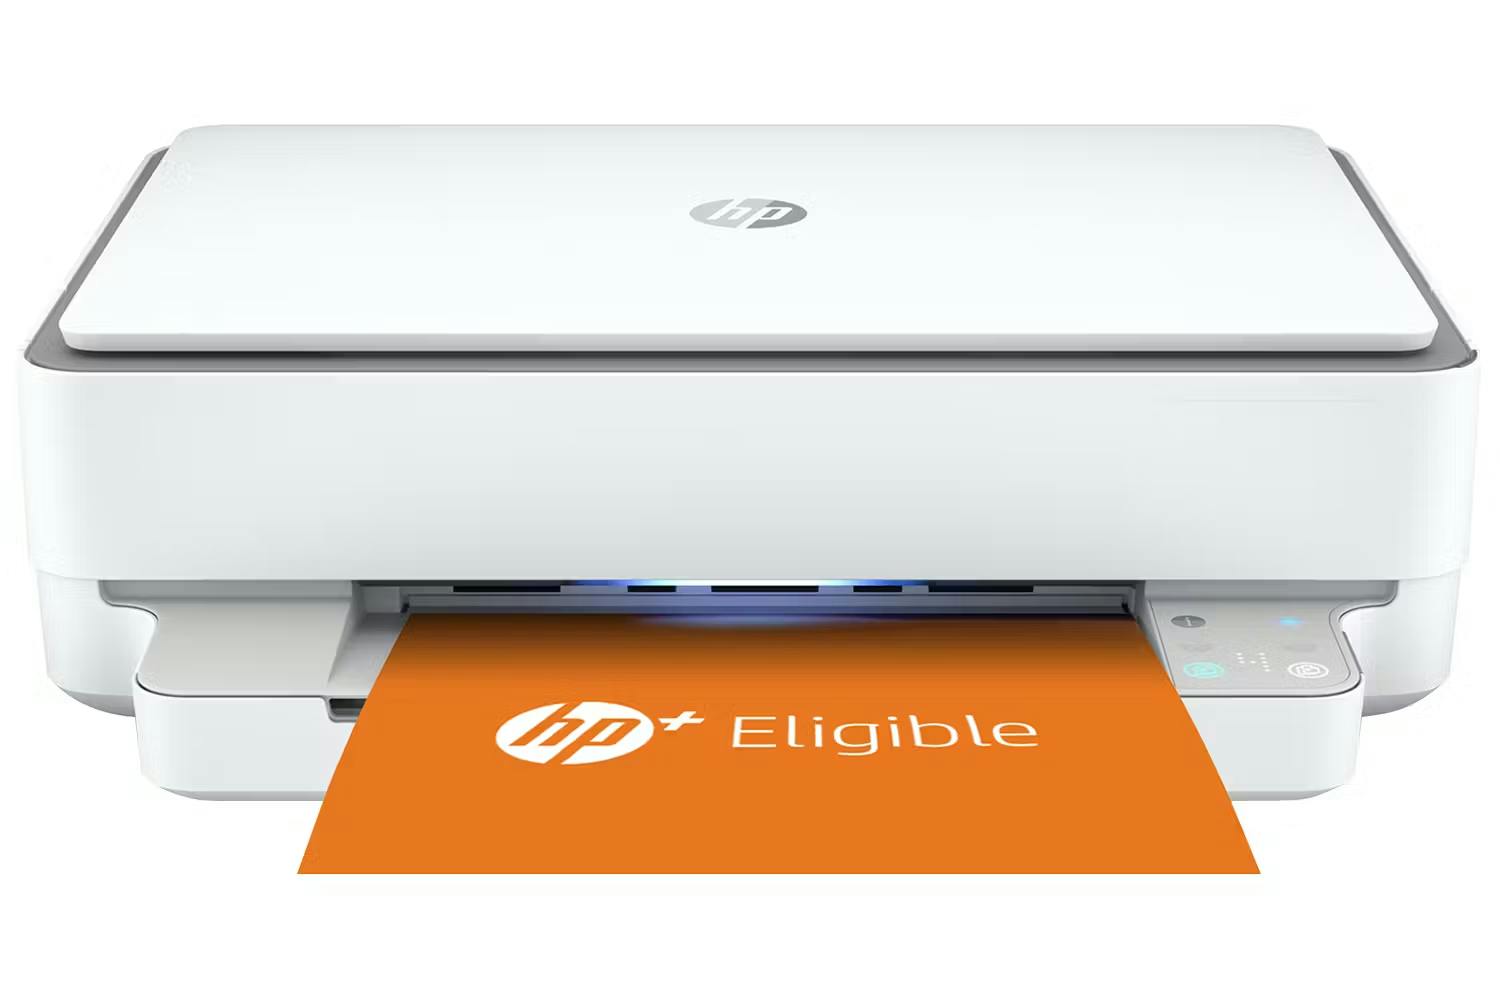 HP Envy 6020e All in One Colour Printer with 3 months of Instant